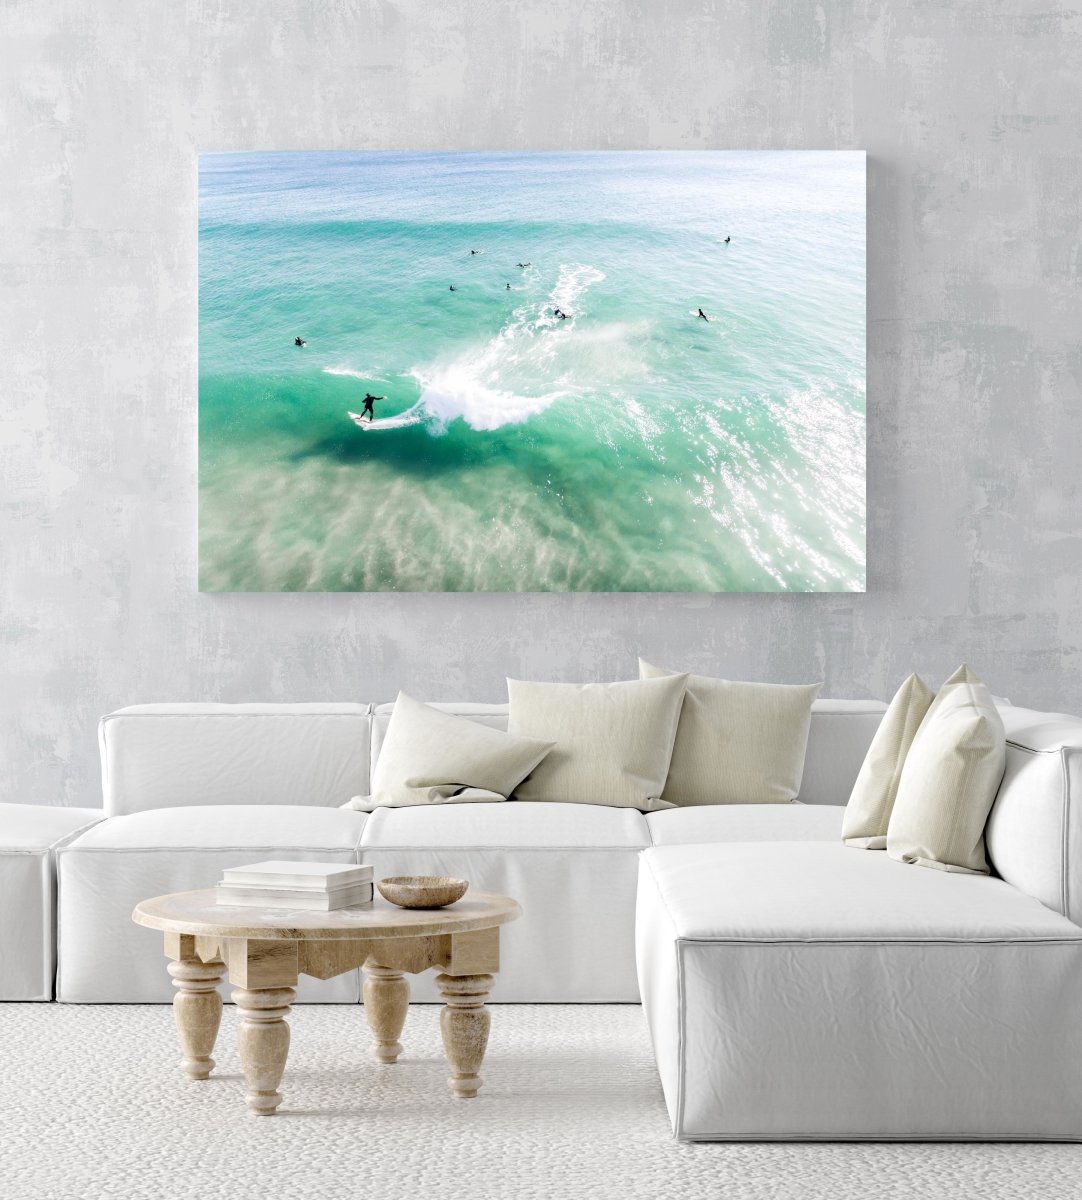 Aerial of surfer carving on a green wave taken at Llandudno Beach in Cape Town in an acrylic/perspex frame